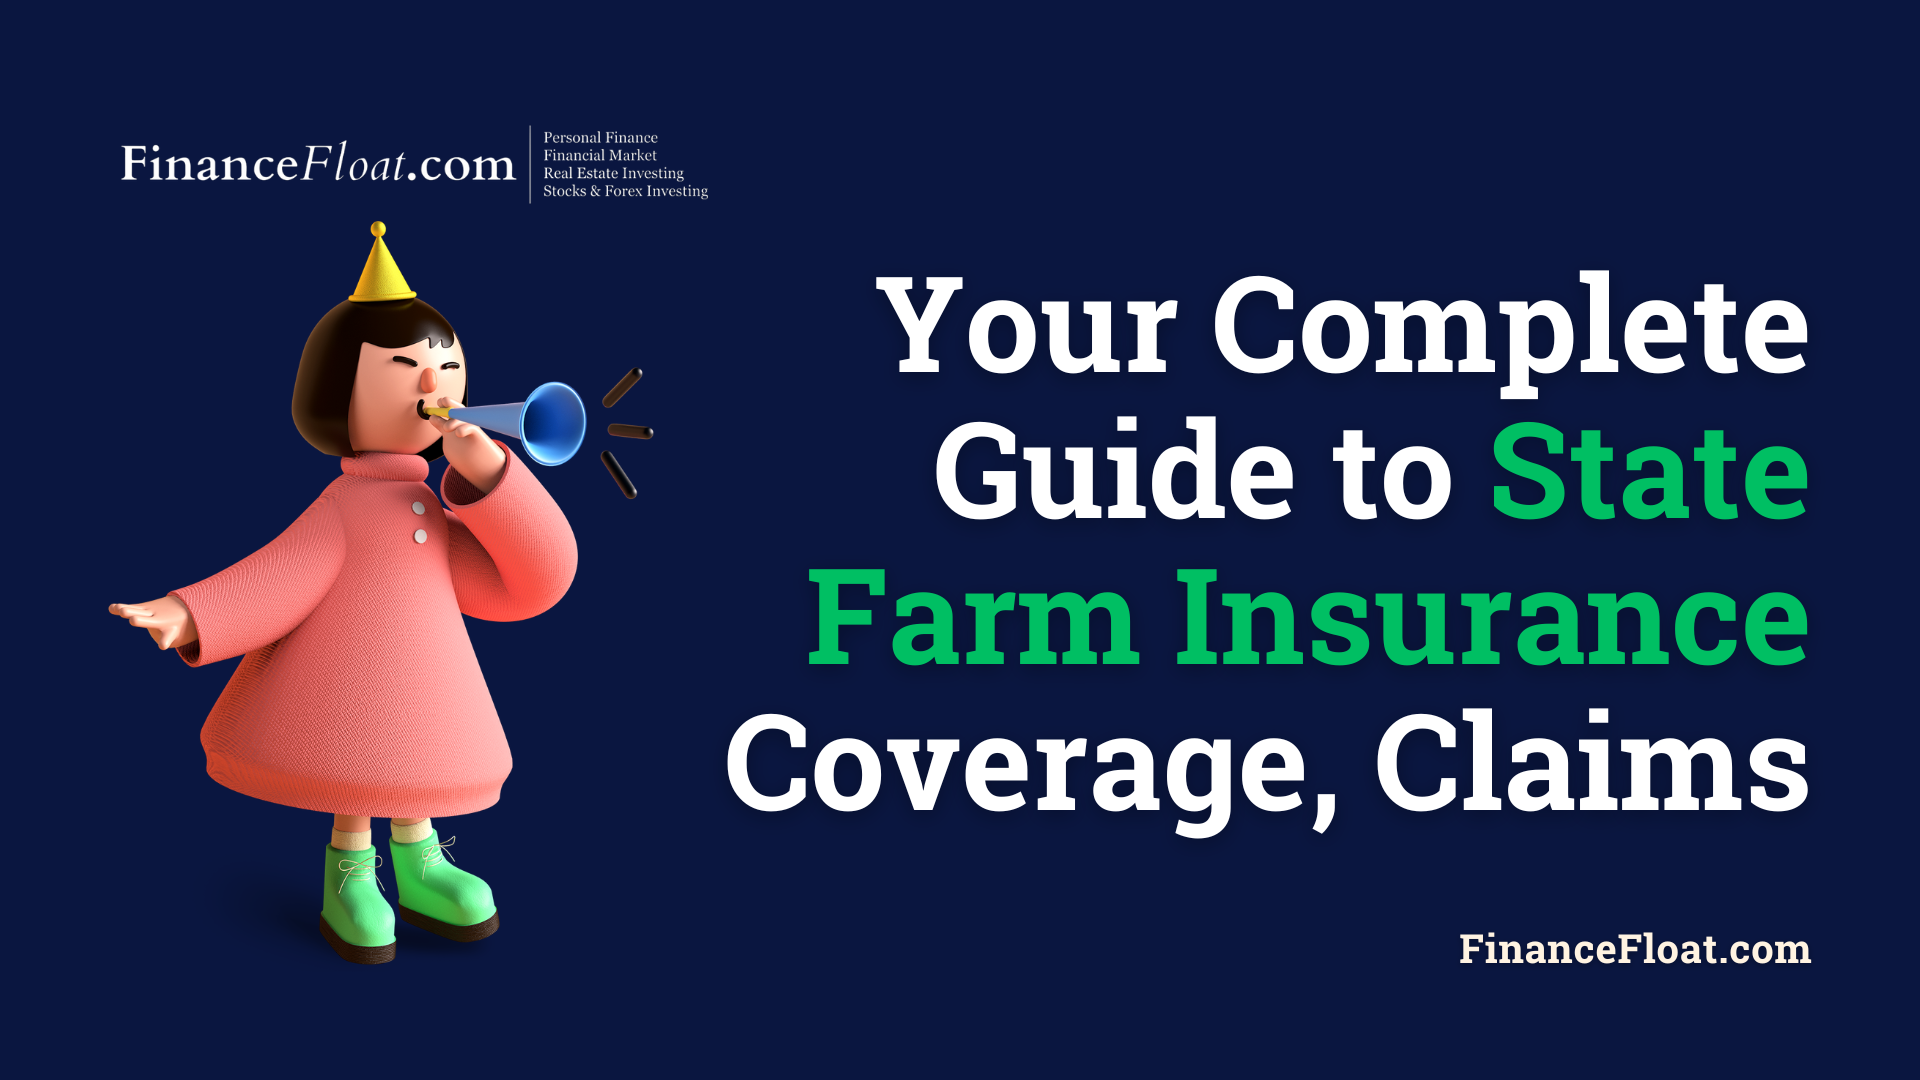 Your Complete Guide to State Farm Insurance Coverage, Claims